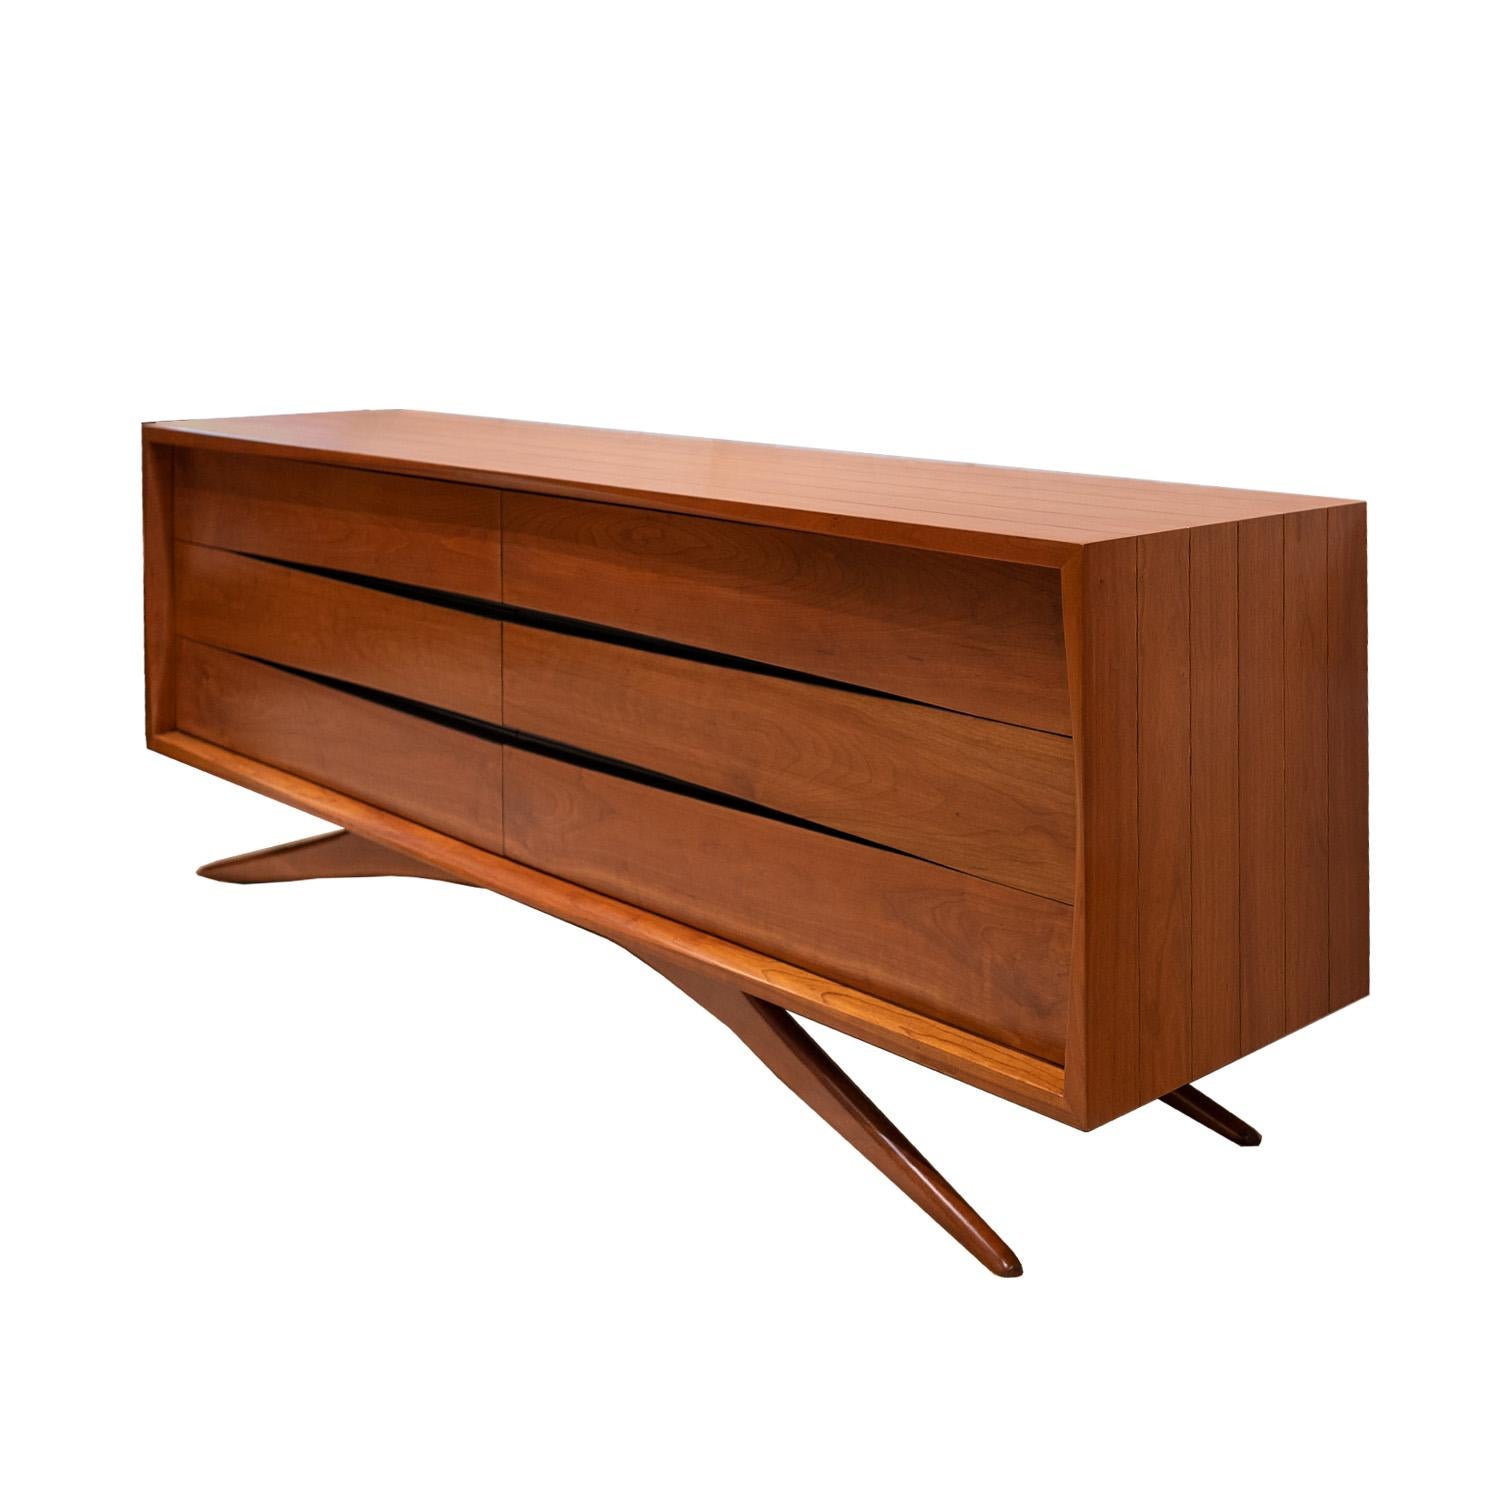 Mid-Century Modern Vladimir Kagan Rare and Iconic Large Chest of Drawers in Walnut, 1950s